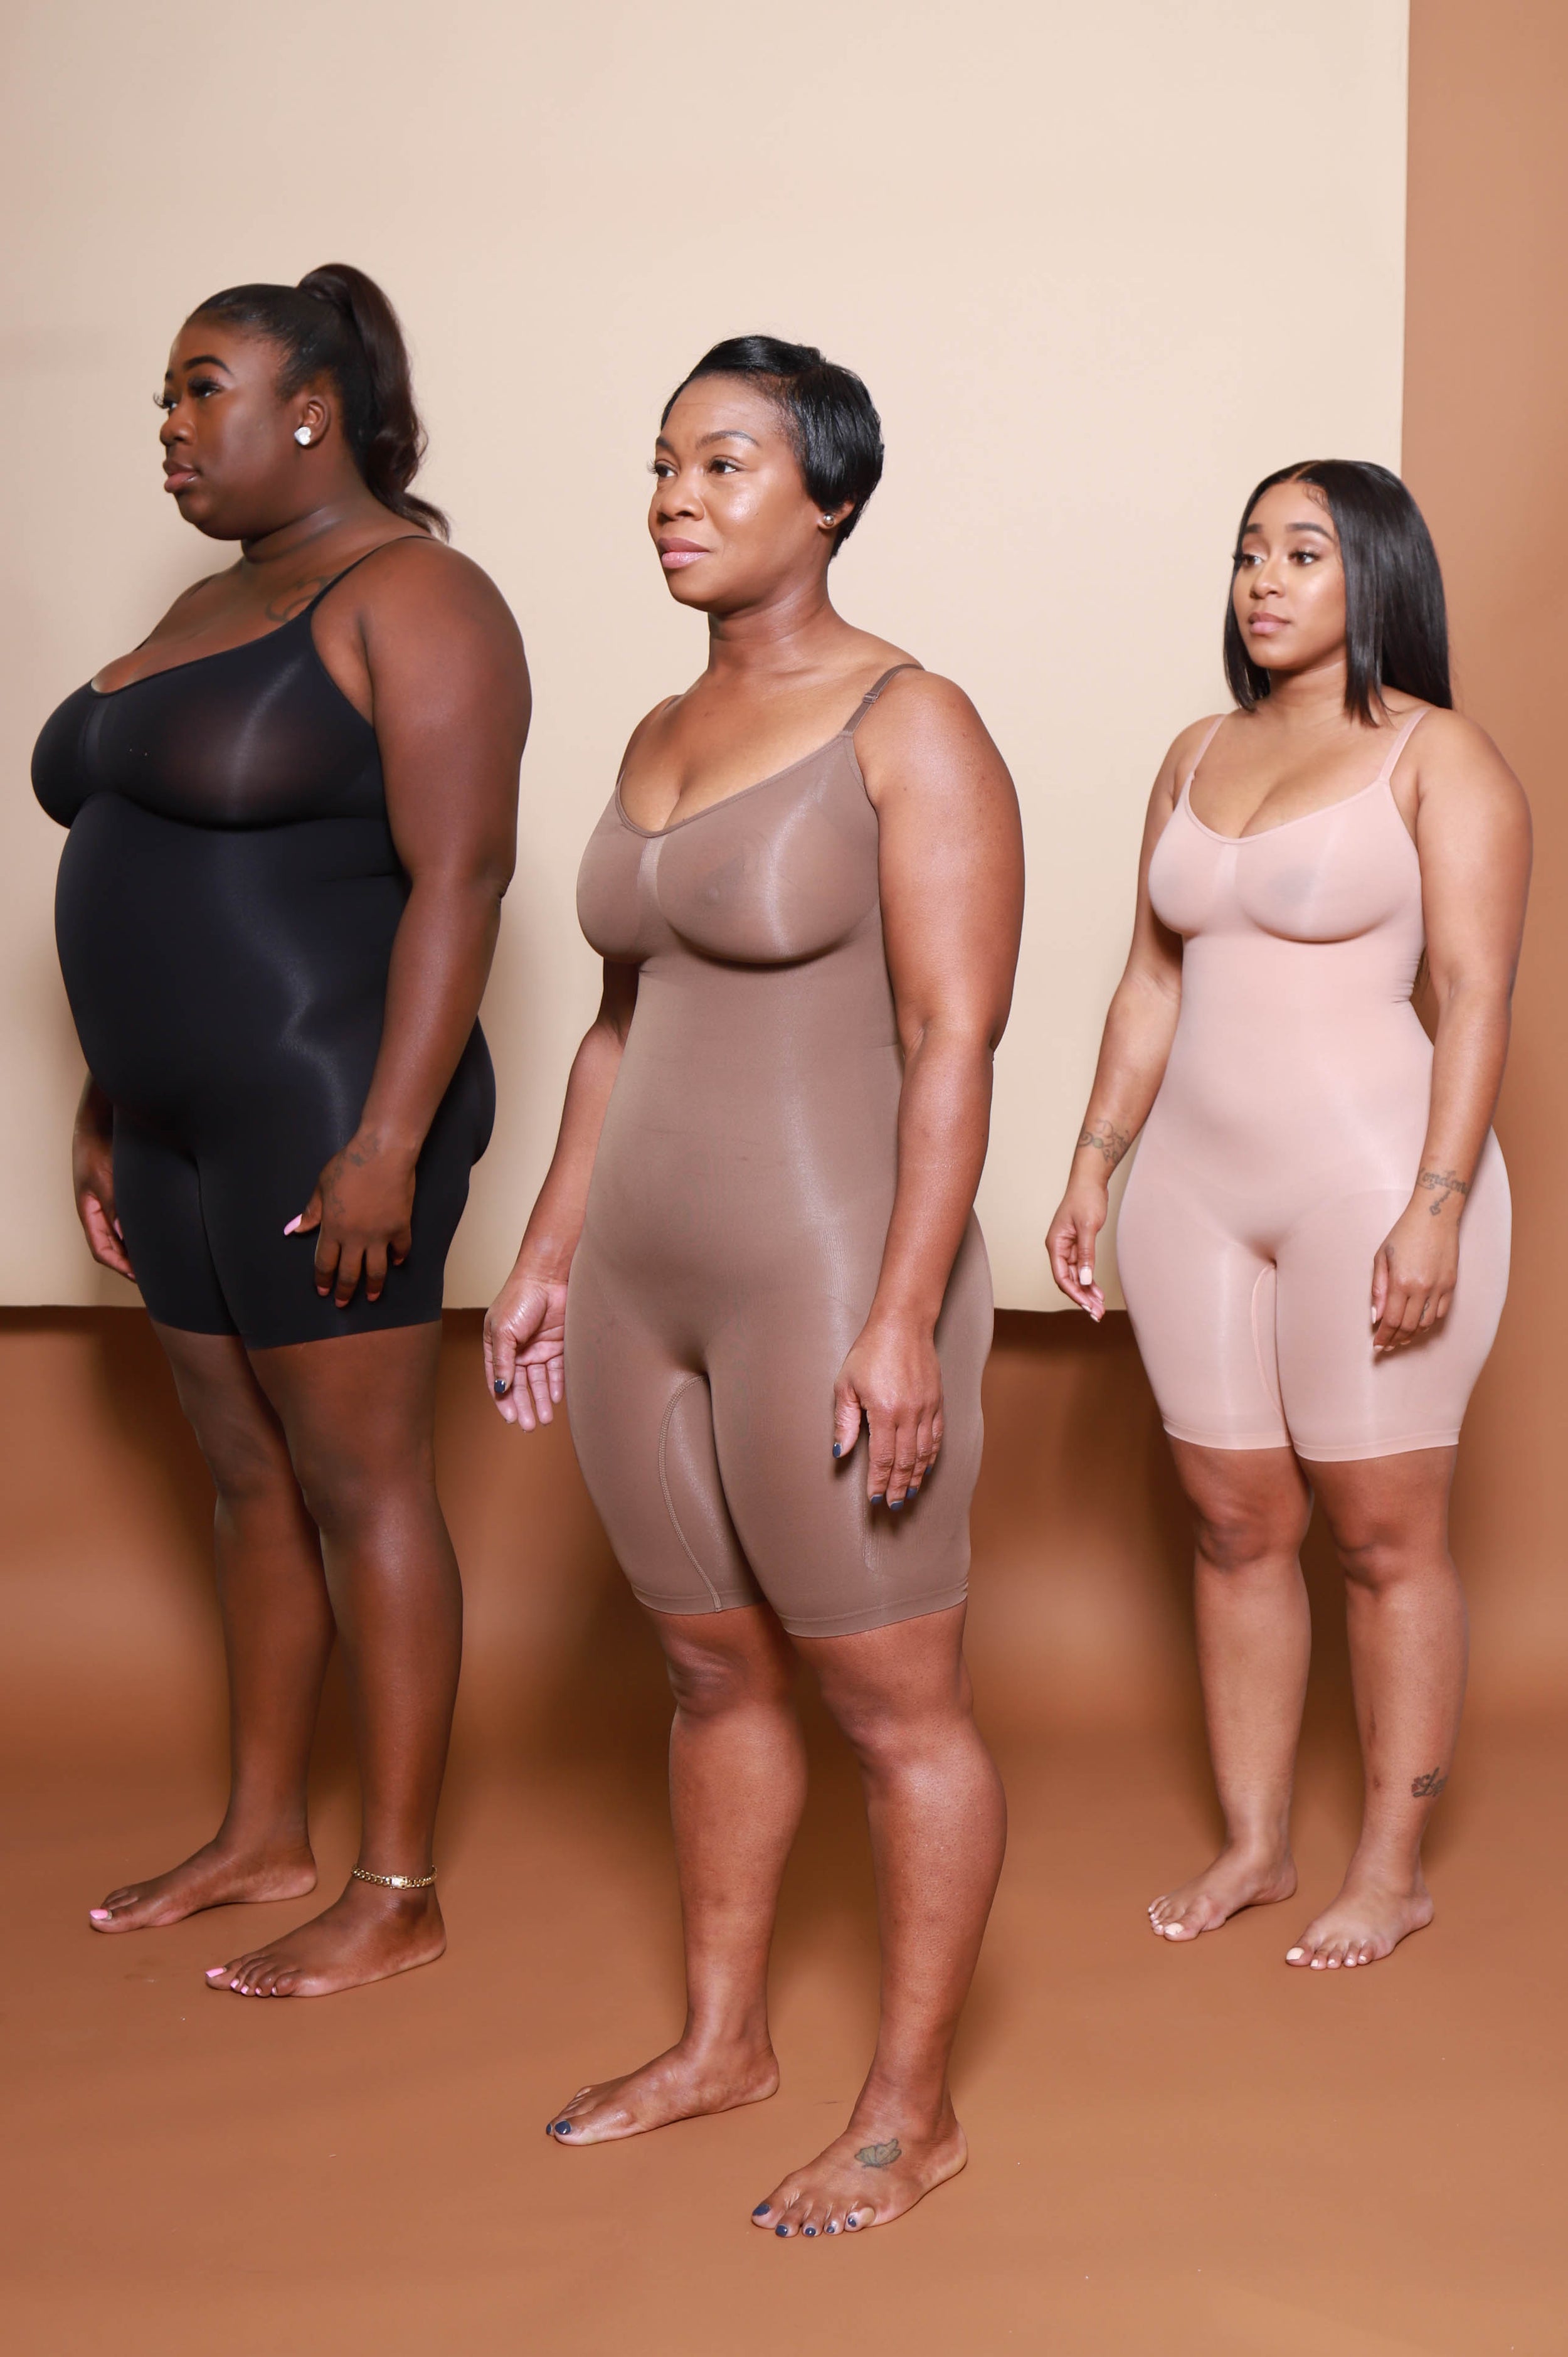 FeelinGirl Plus Size Seamless Body Shaper with Tummy Control, Butt Lifter  and Back Support - Black XS/S at  Women's Clothing store